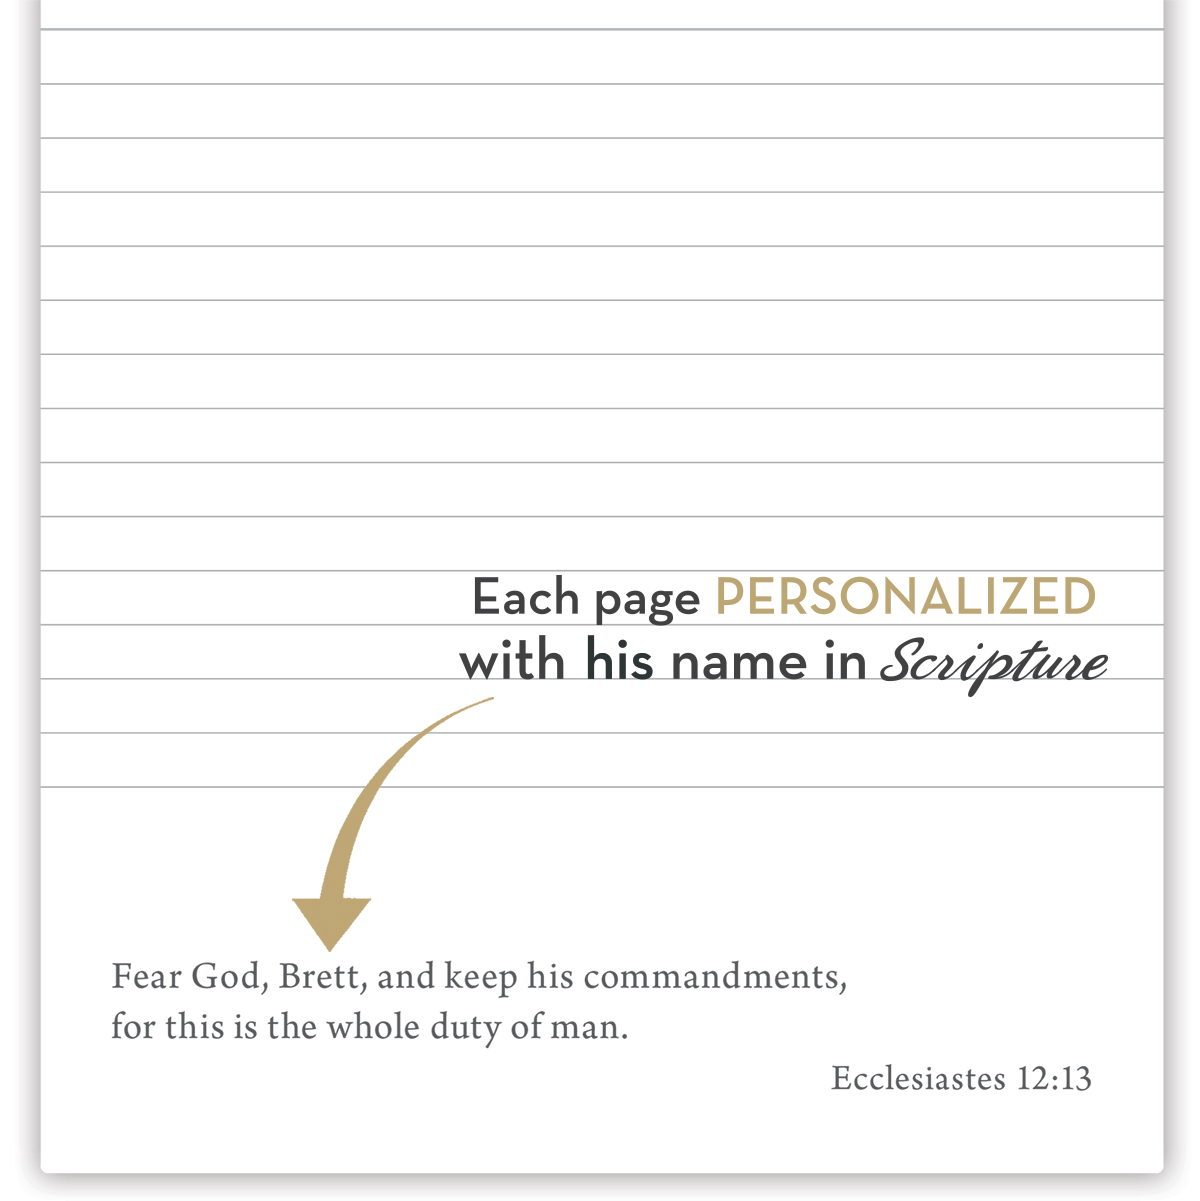 Ecclesiastes 12:13 personalized scripture, personalized devotional, personalized bible verse, personalized christian gifts